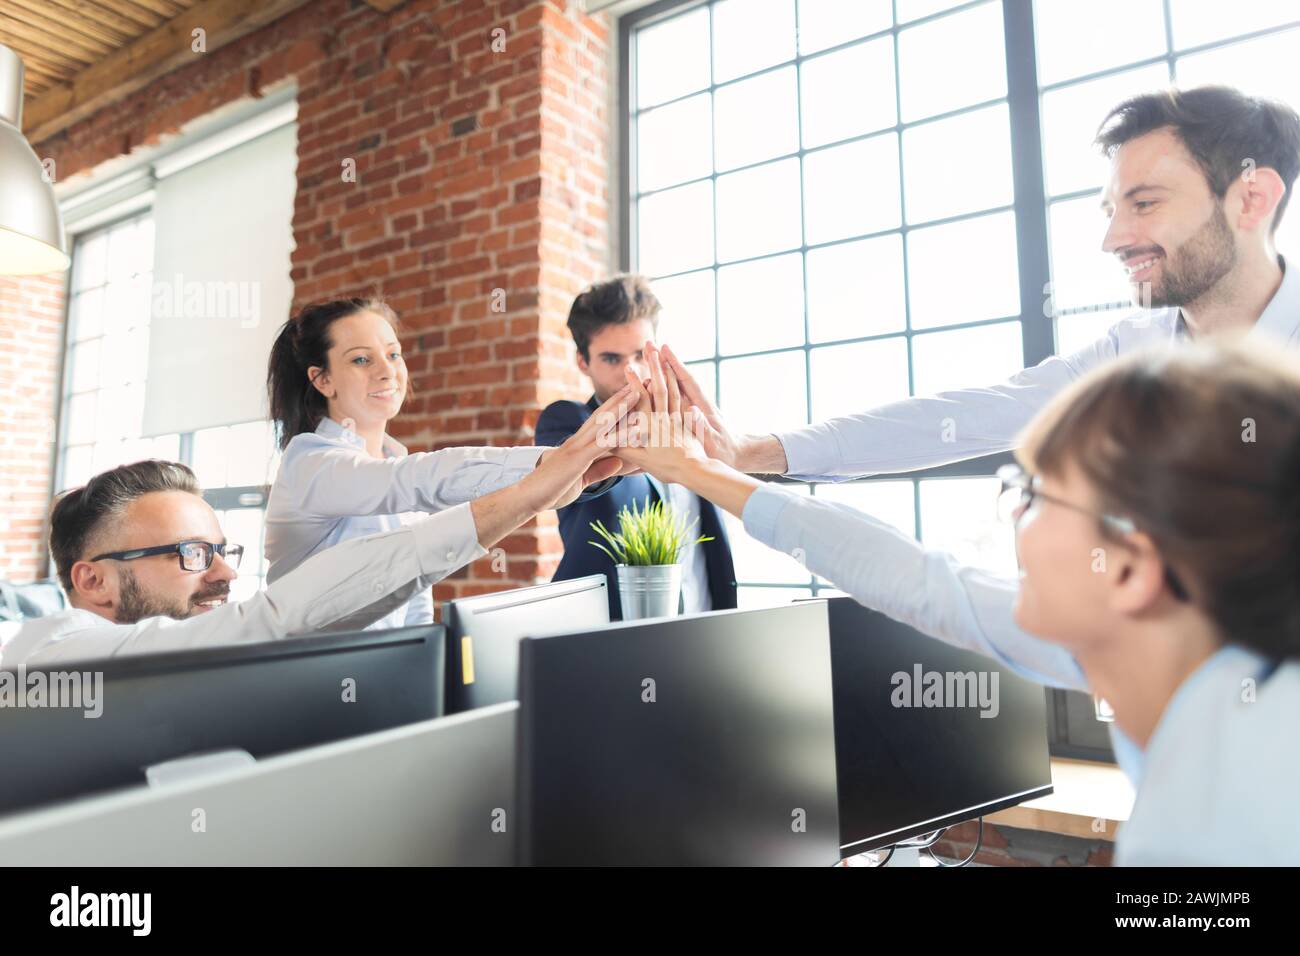 Business people happy showing team work and giving five in office. Teamwork concepts. Stock Photo